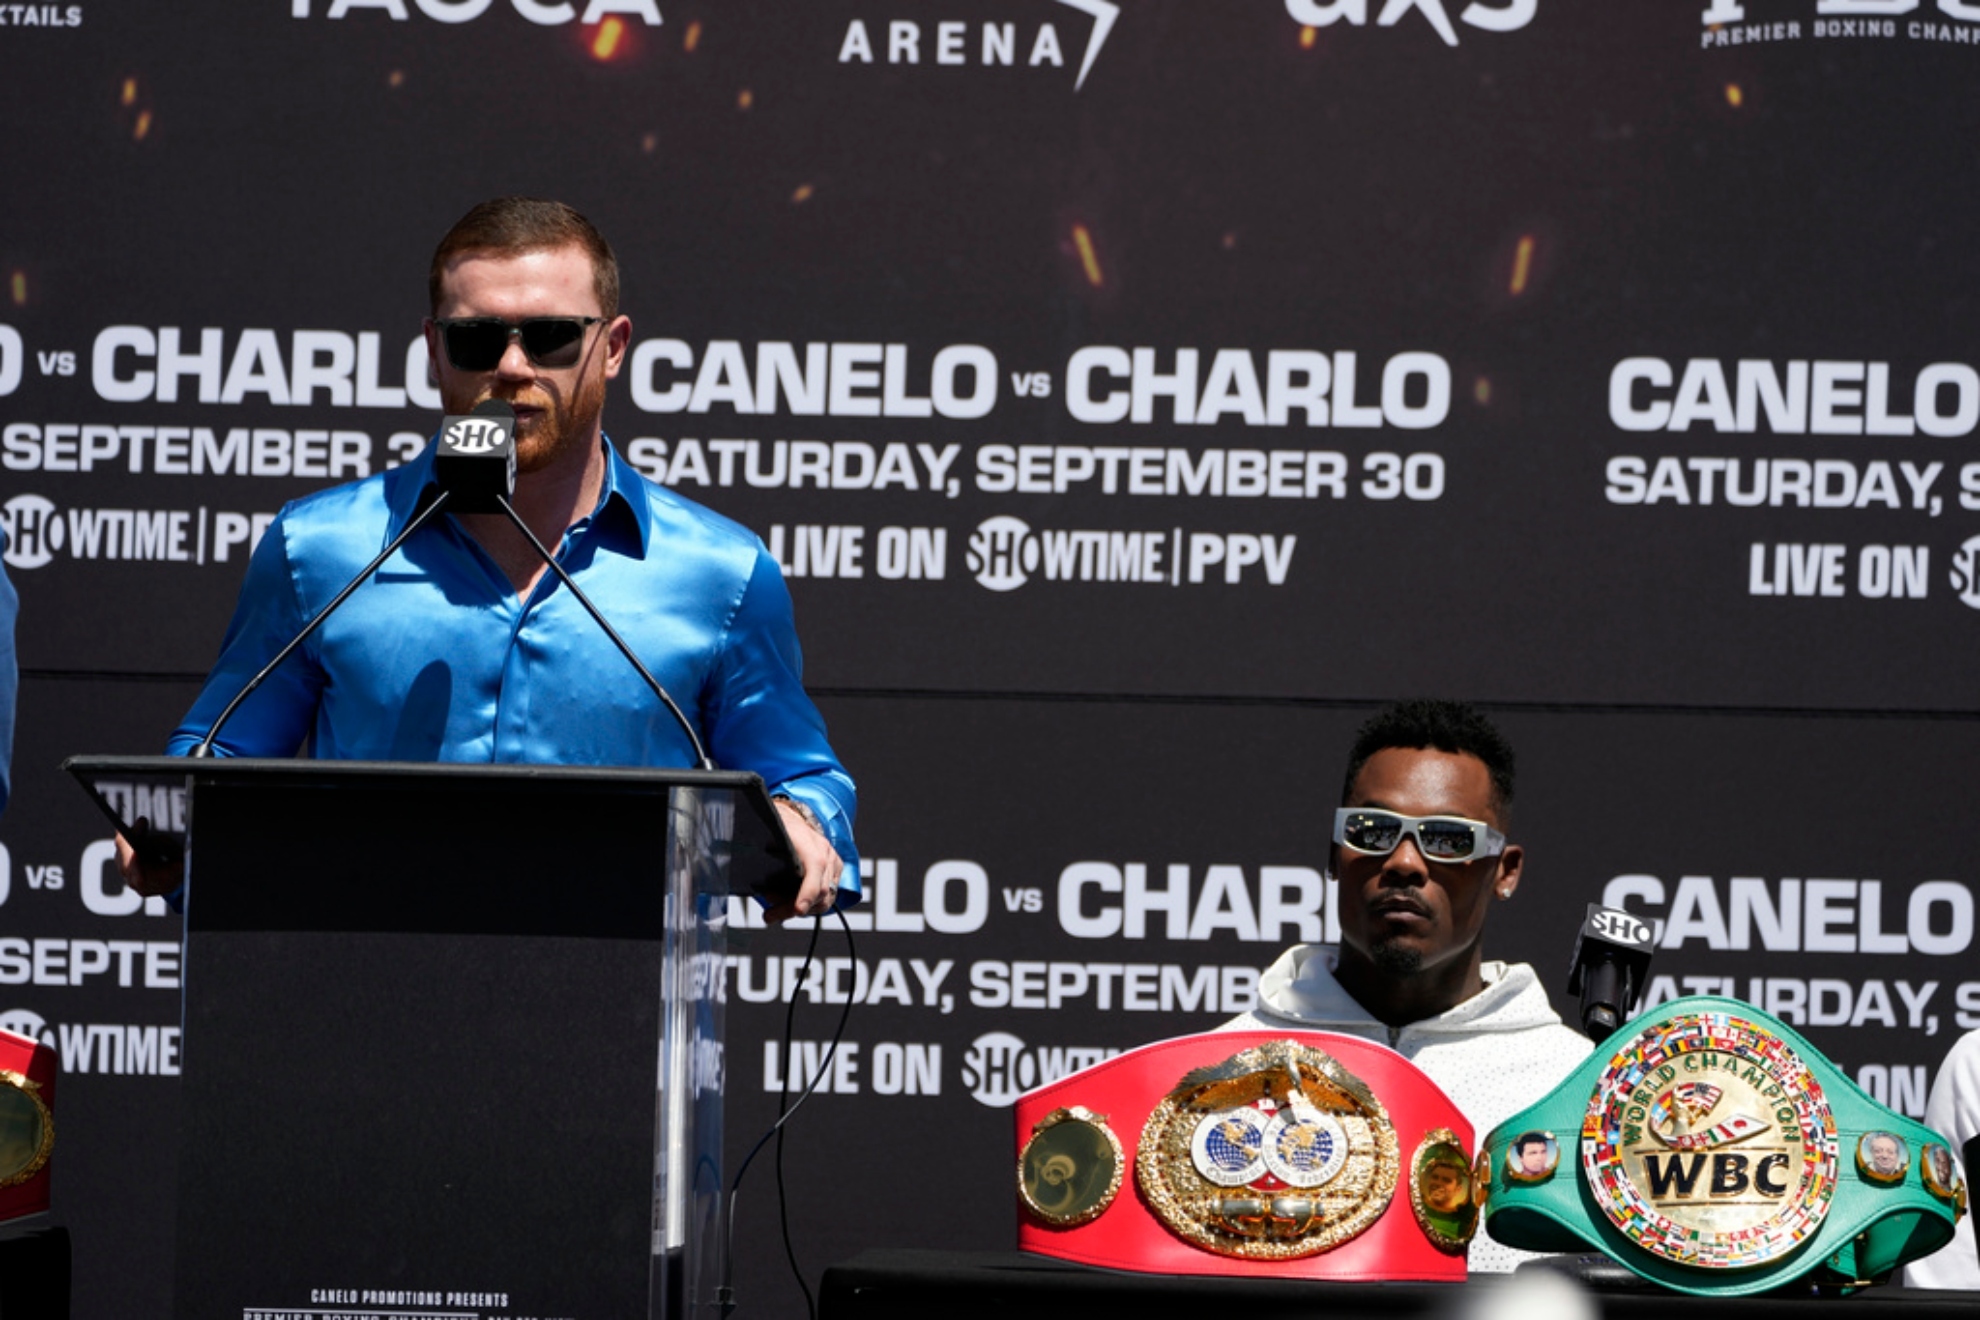 Canelo vs. Charlo: Betting odds and intriguing predictions unveiled